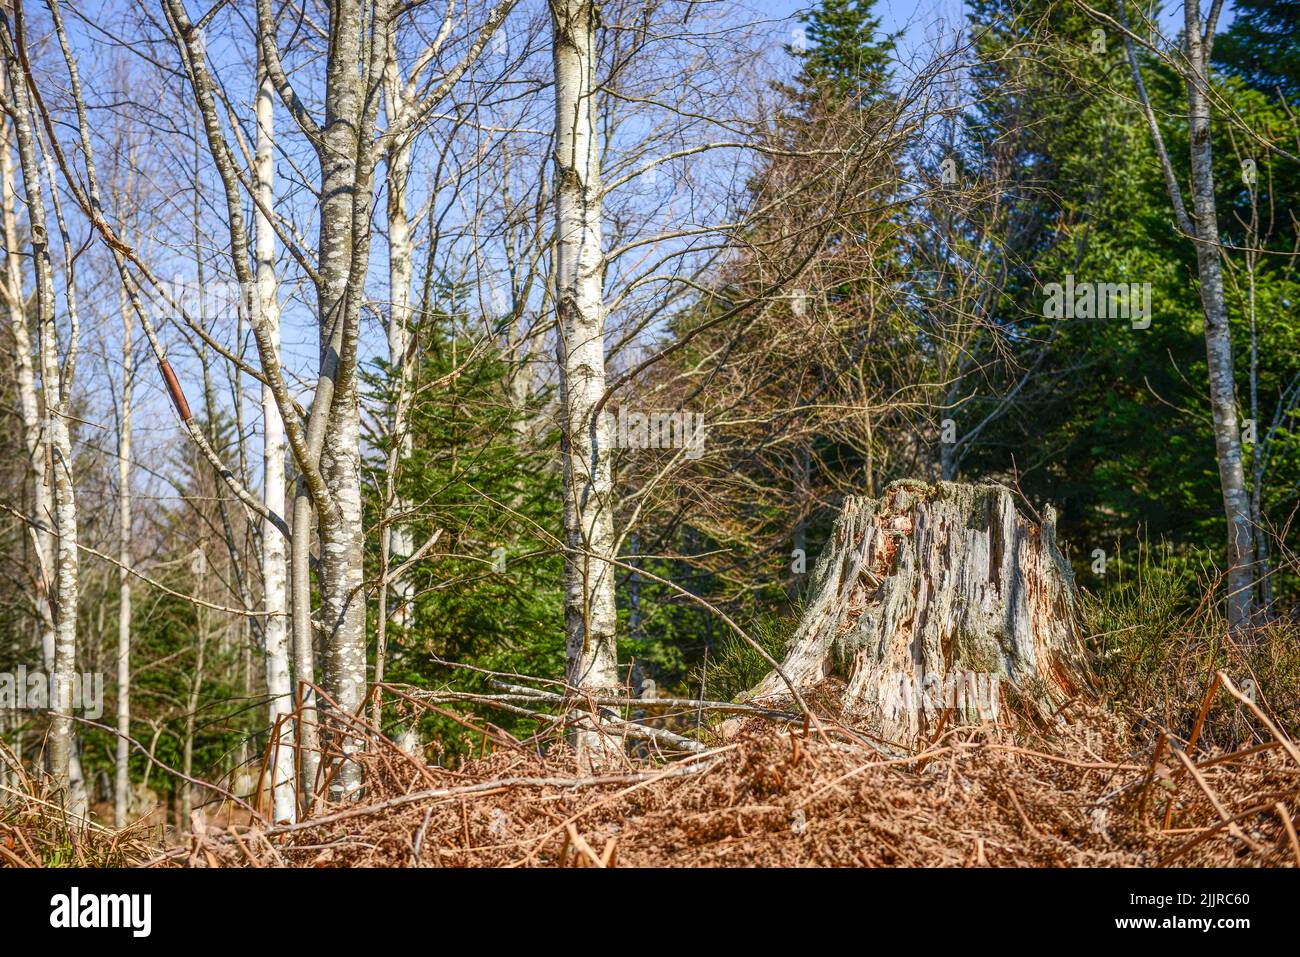 A natural landscape of a forest with trees of different types, a cut-down tree and fallen branches Stock Photo